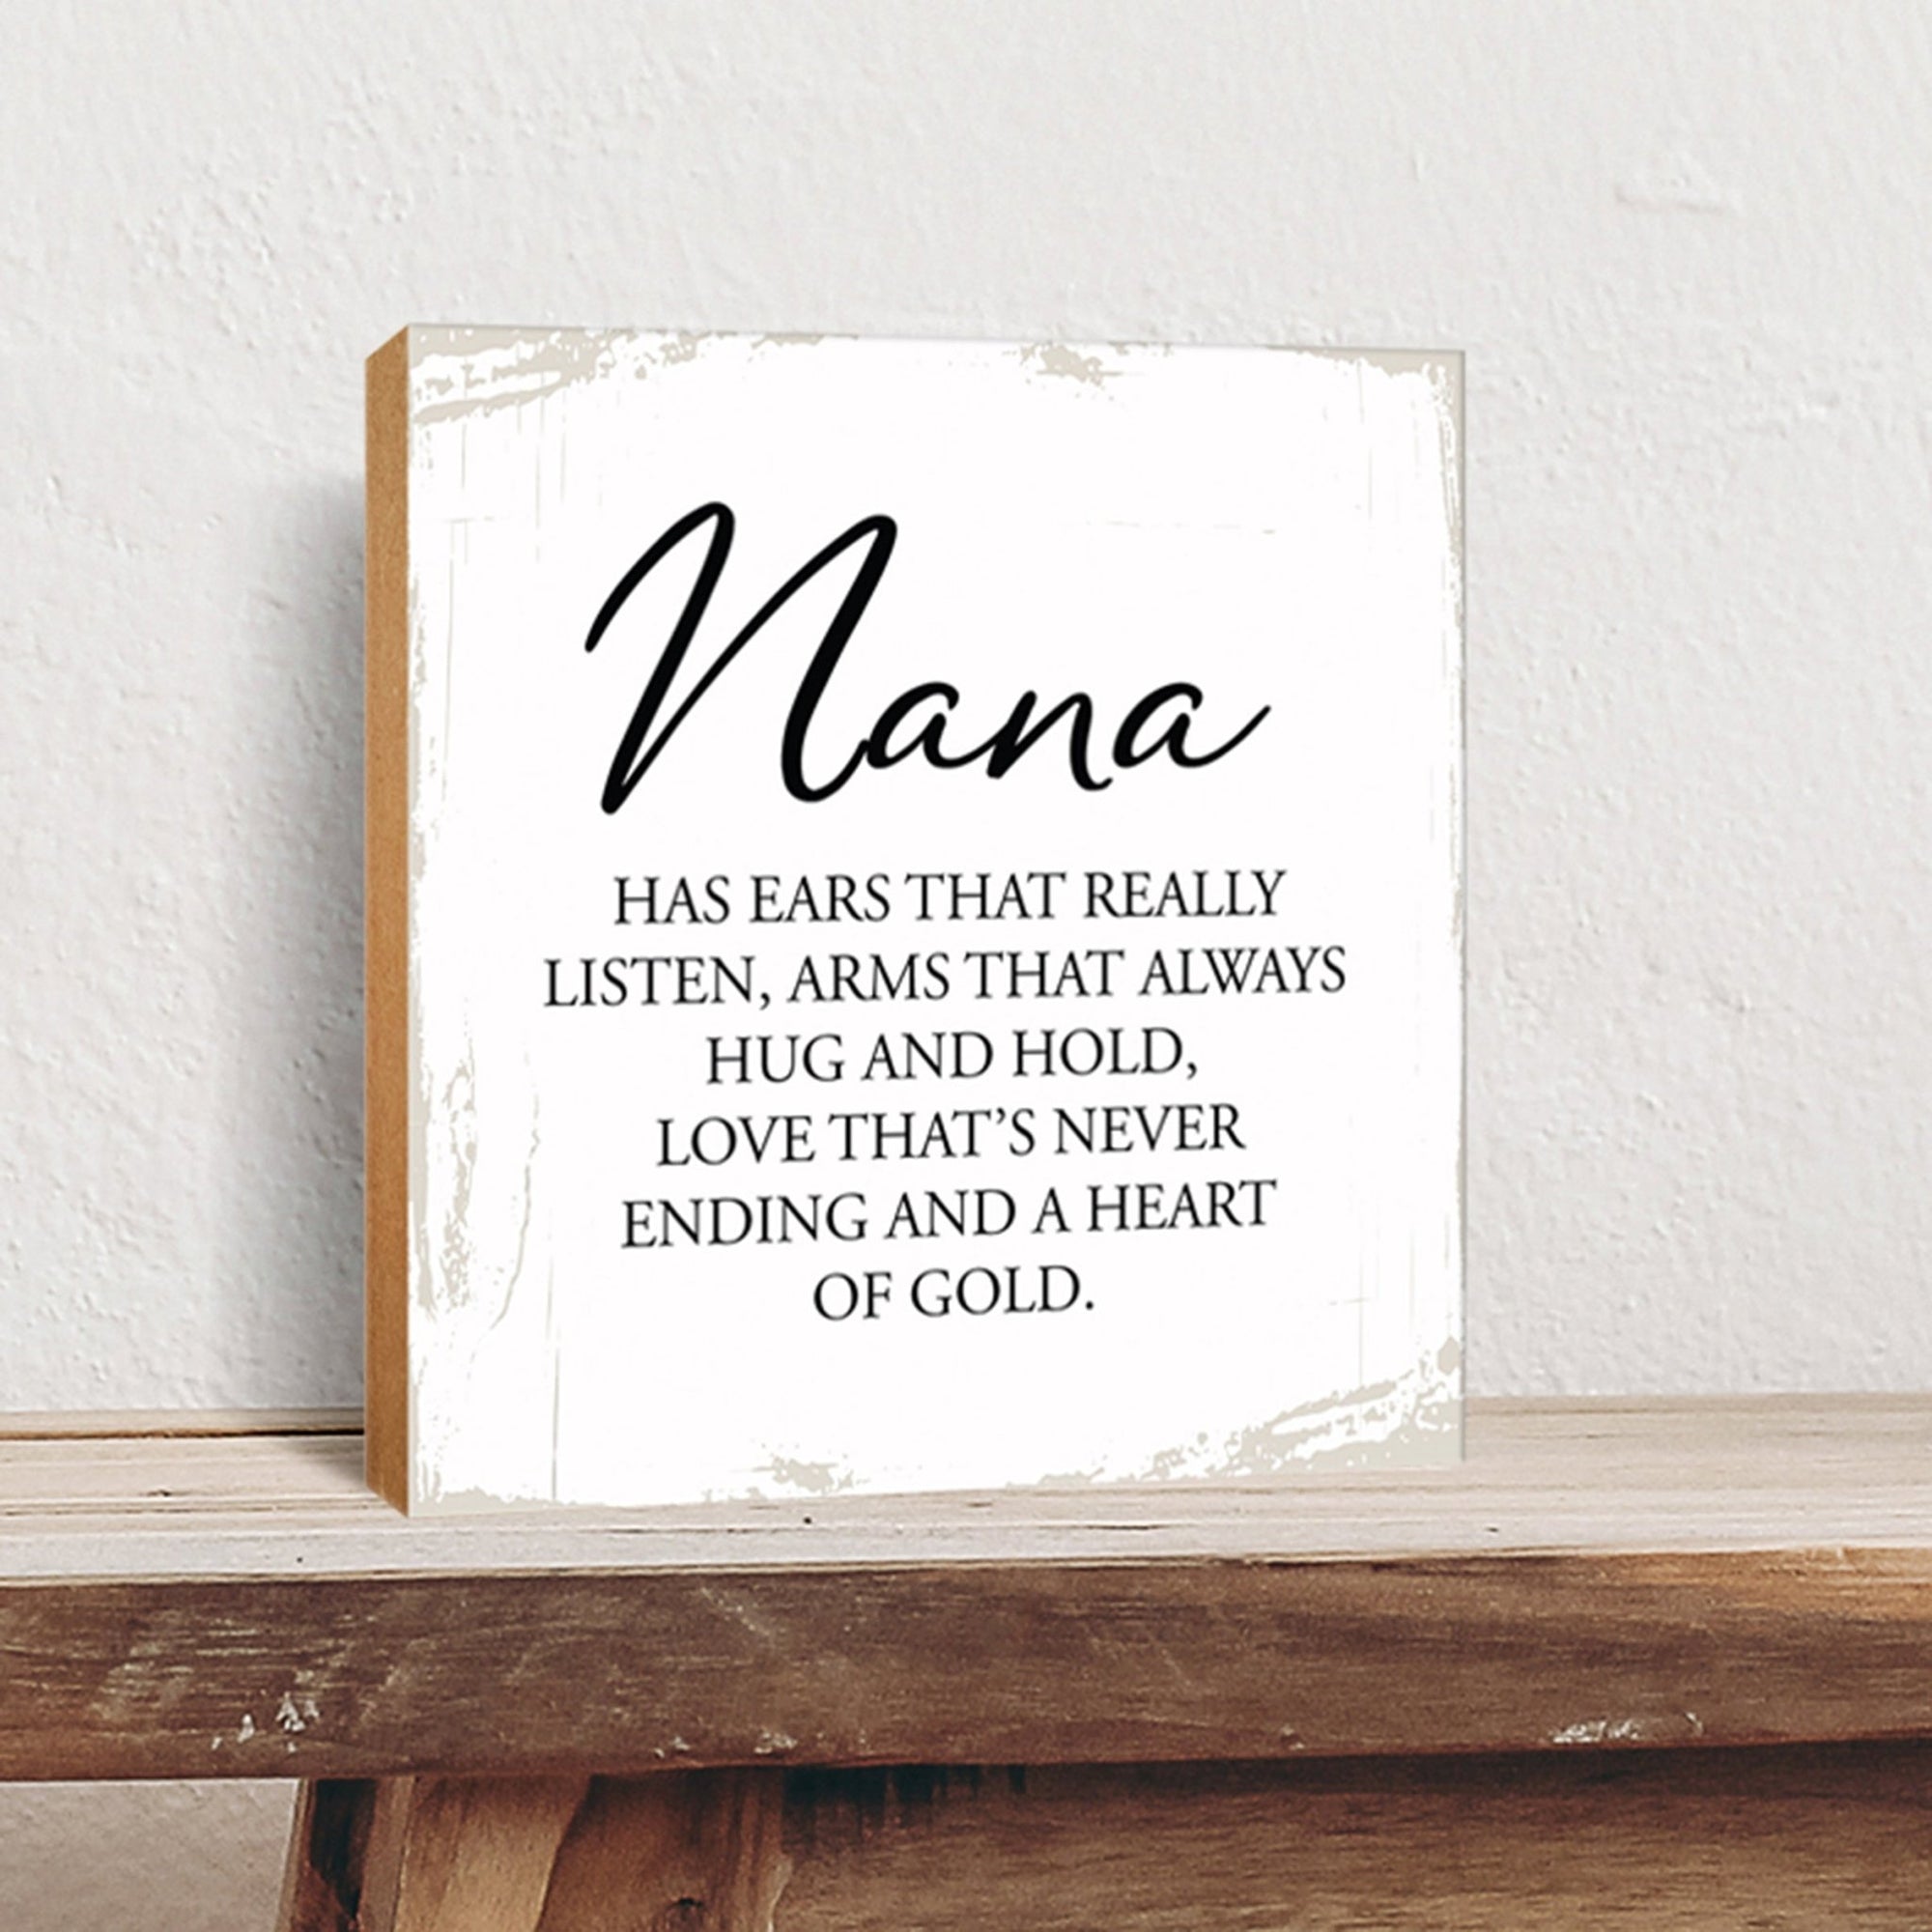 Nana Has Ears Floral 6x6 Inches Wood Family Art Sign Tabletop and Shelving For Home Décor - LifeSong Milestones